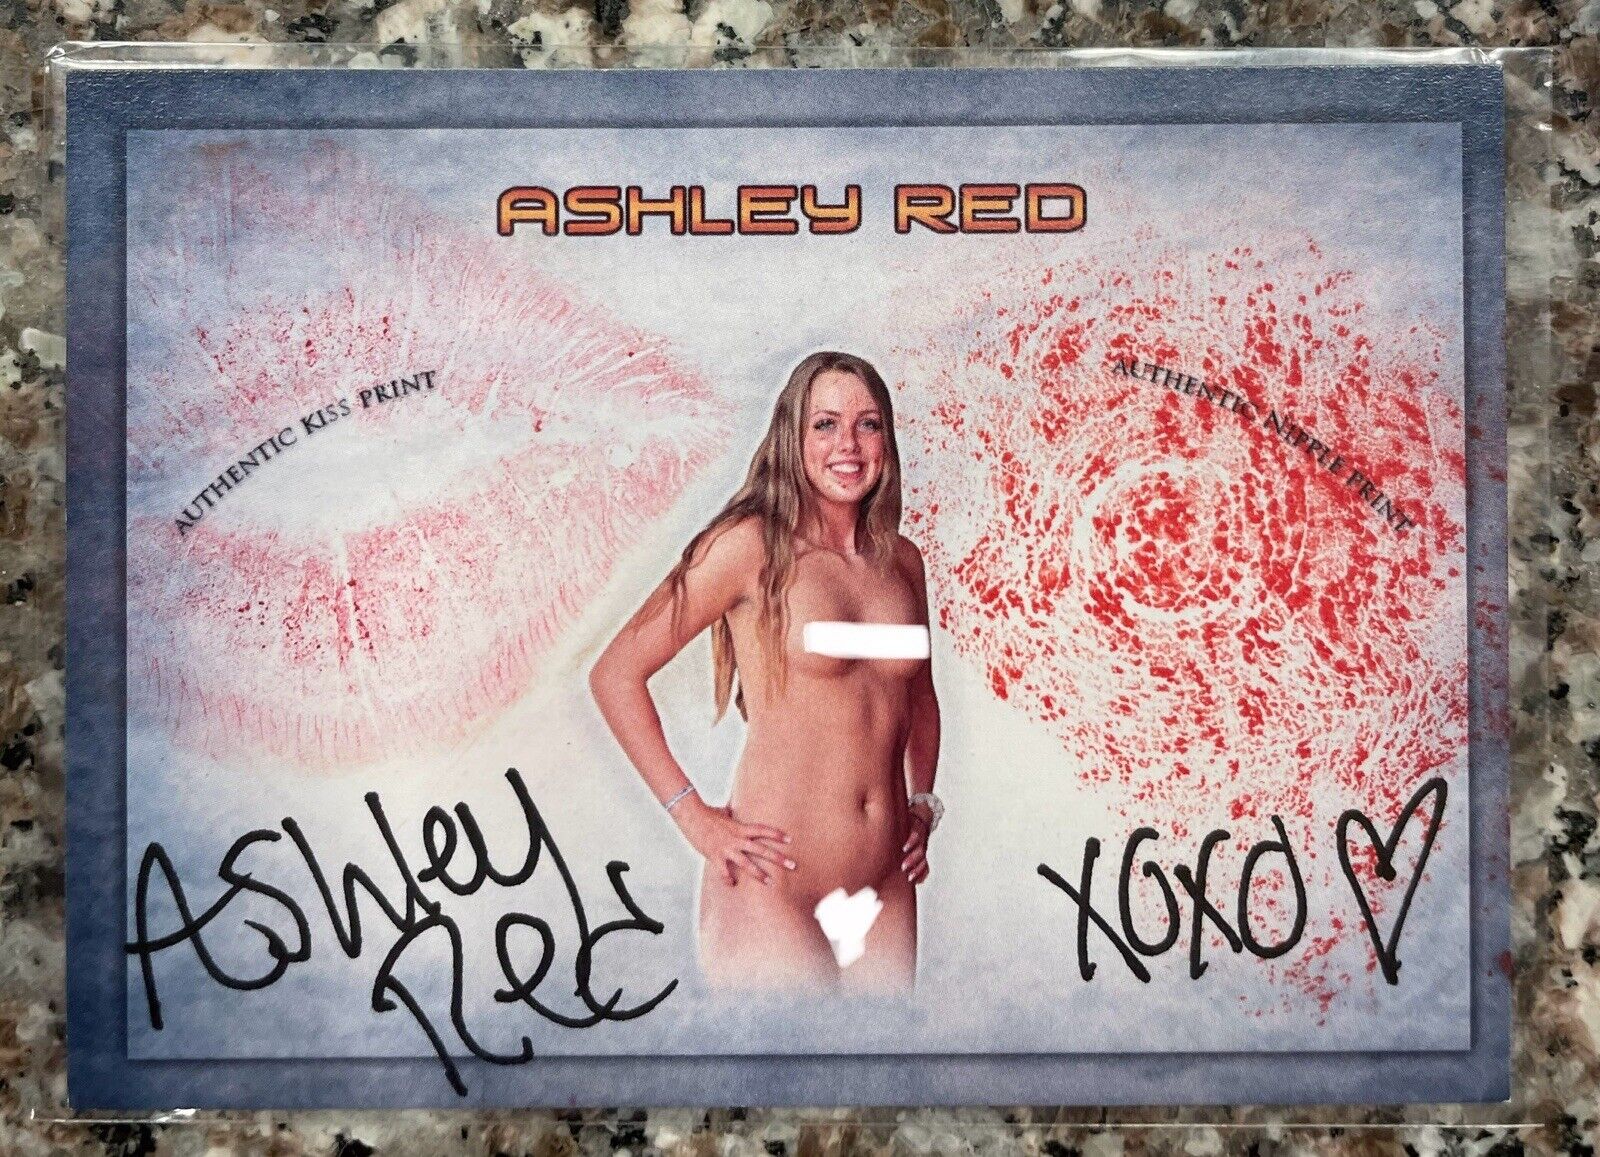 Collectors Expo 💫Authentic Auto Kiss Nip Card💫 💕Ashley Red 2020 💕